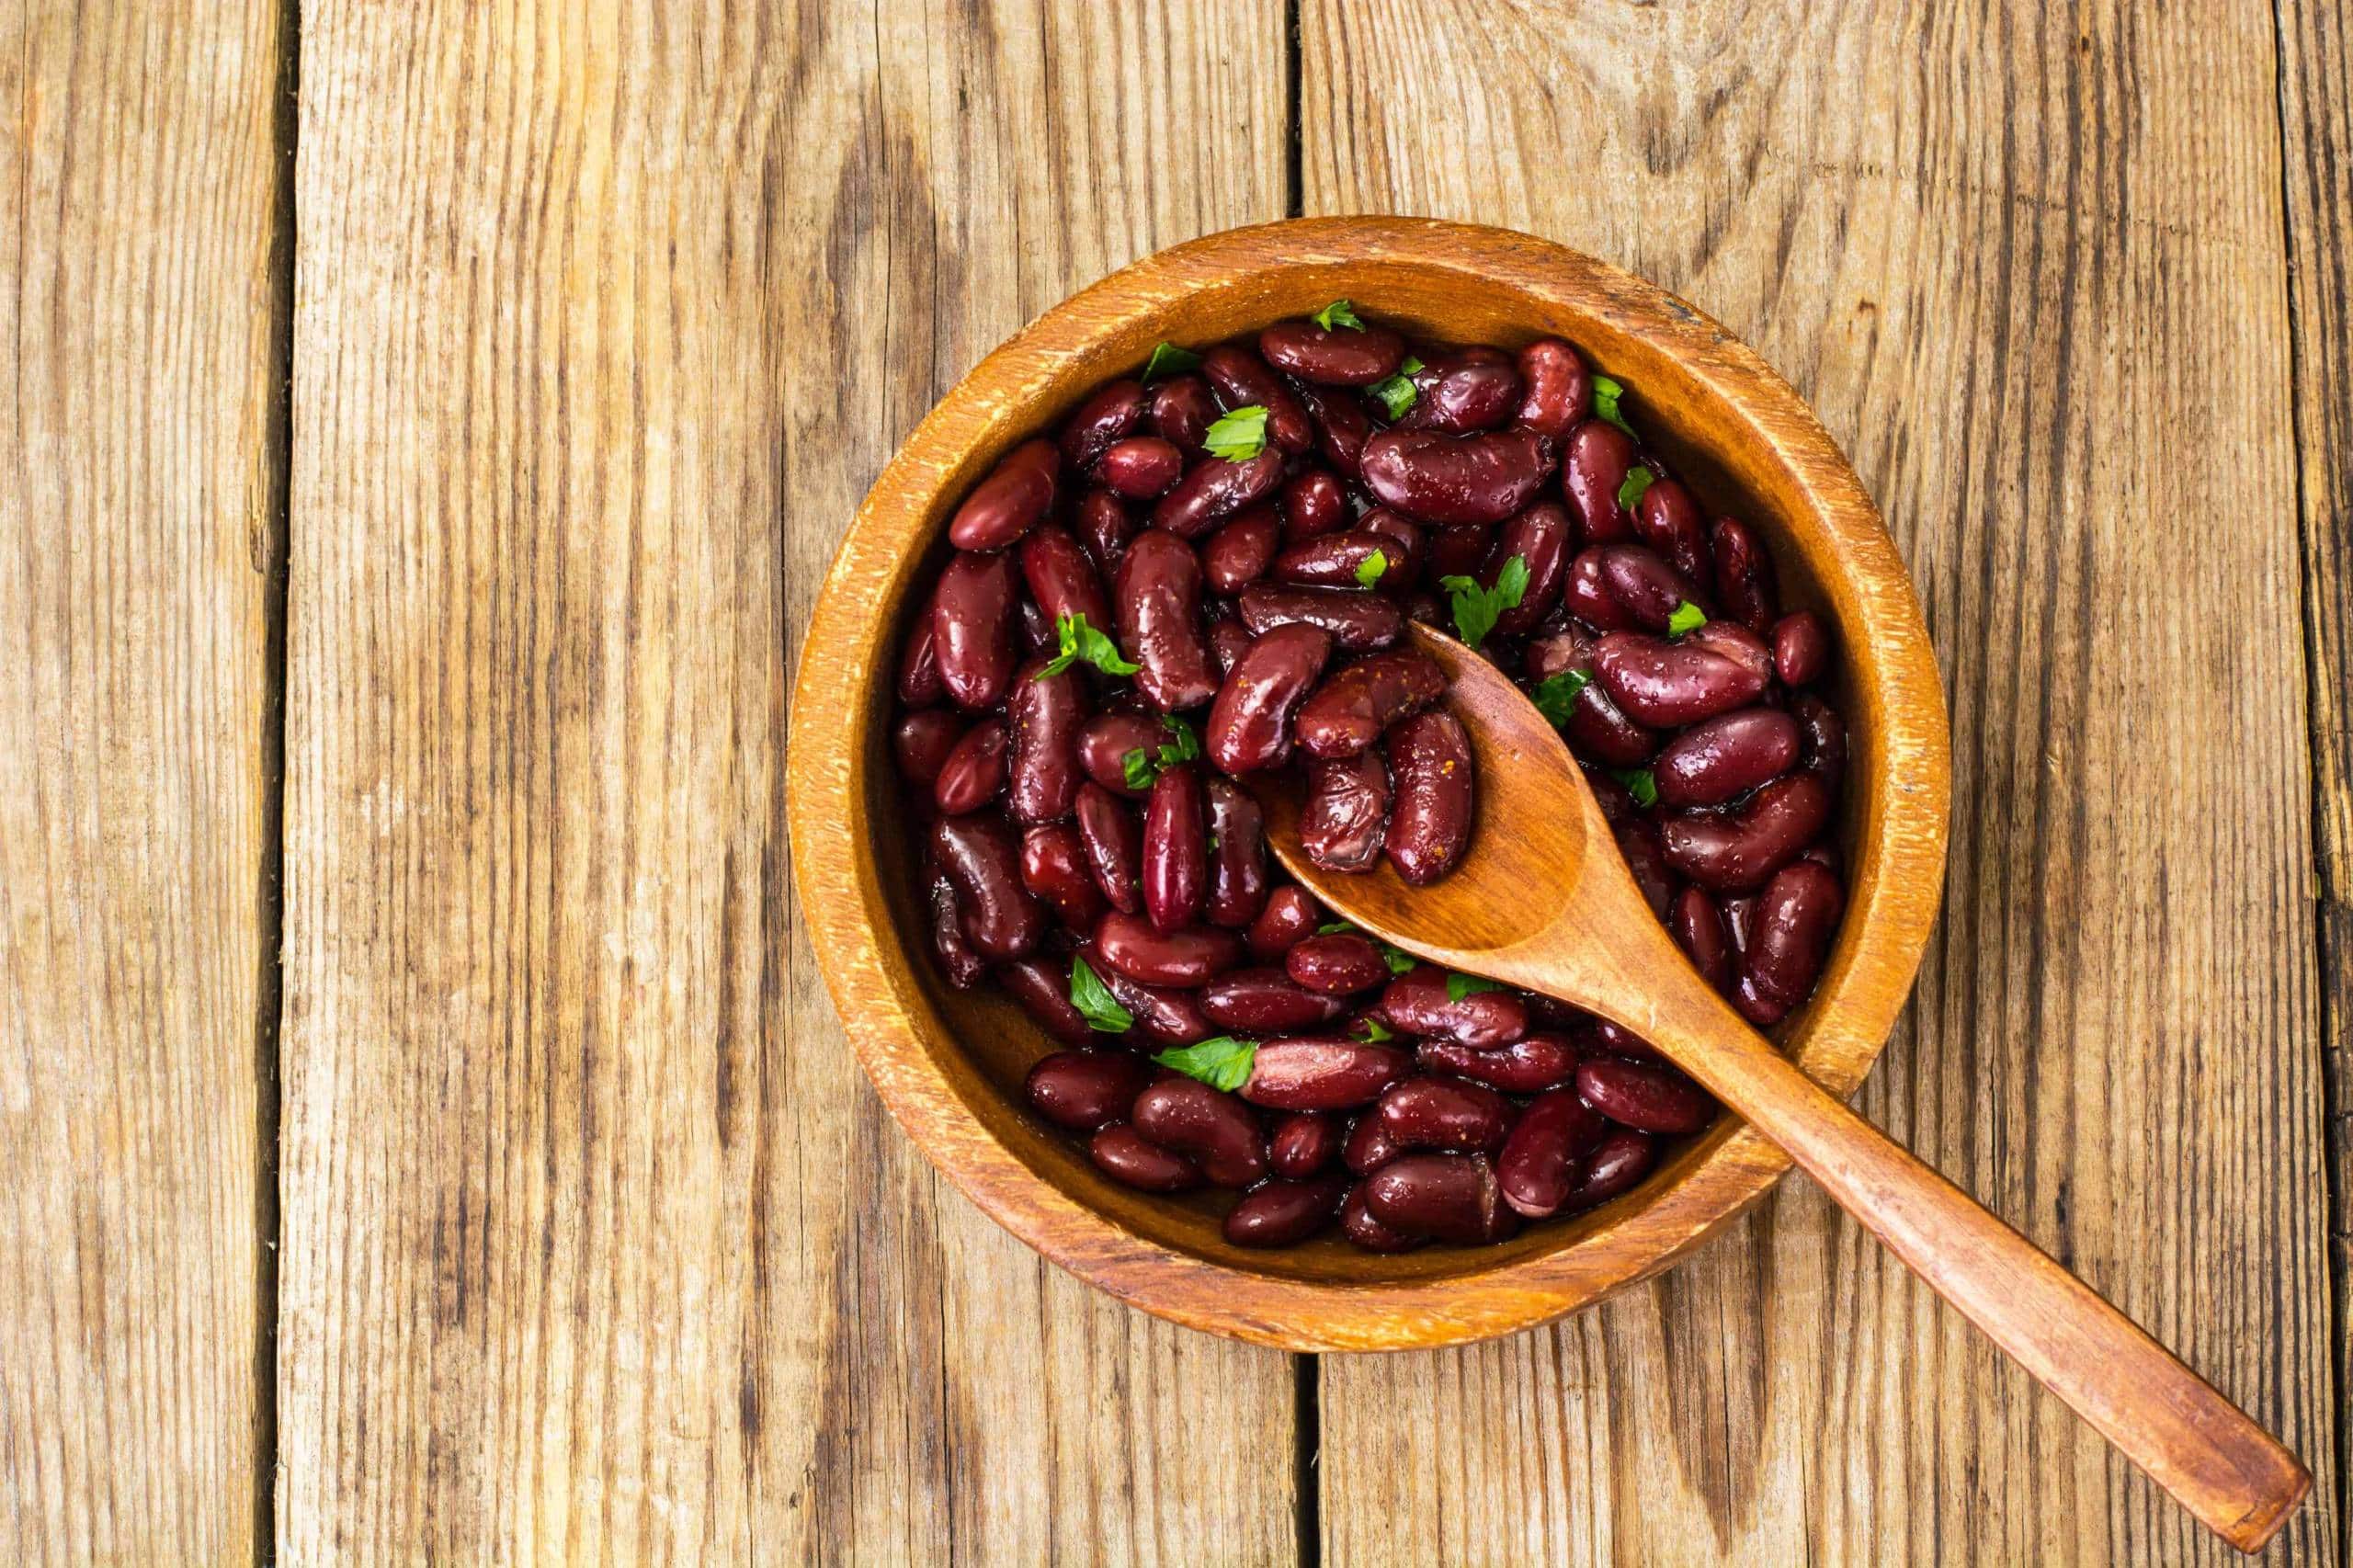 Who Invented Kidney Beans